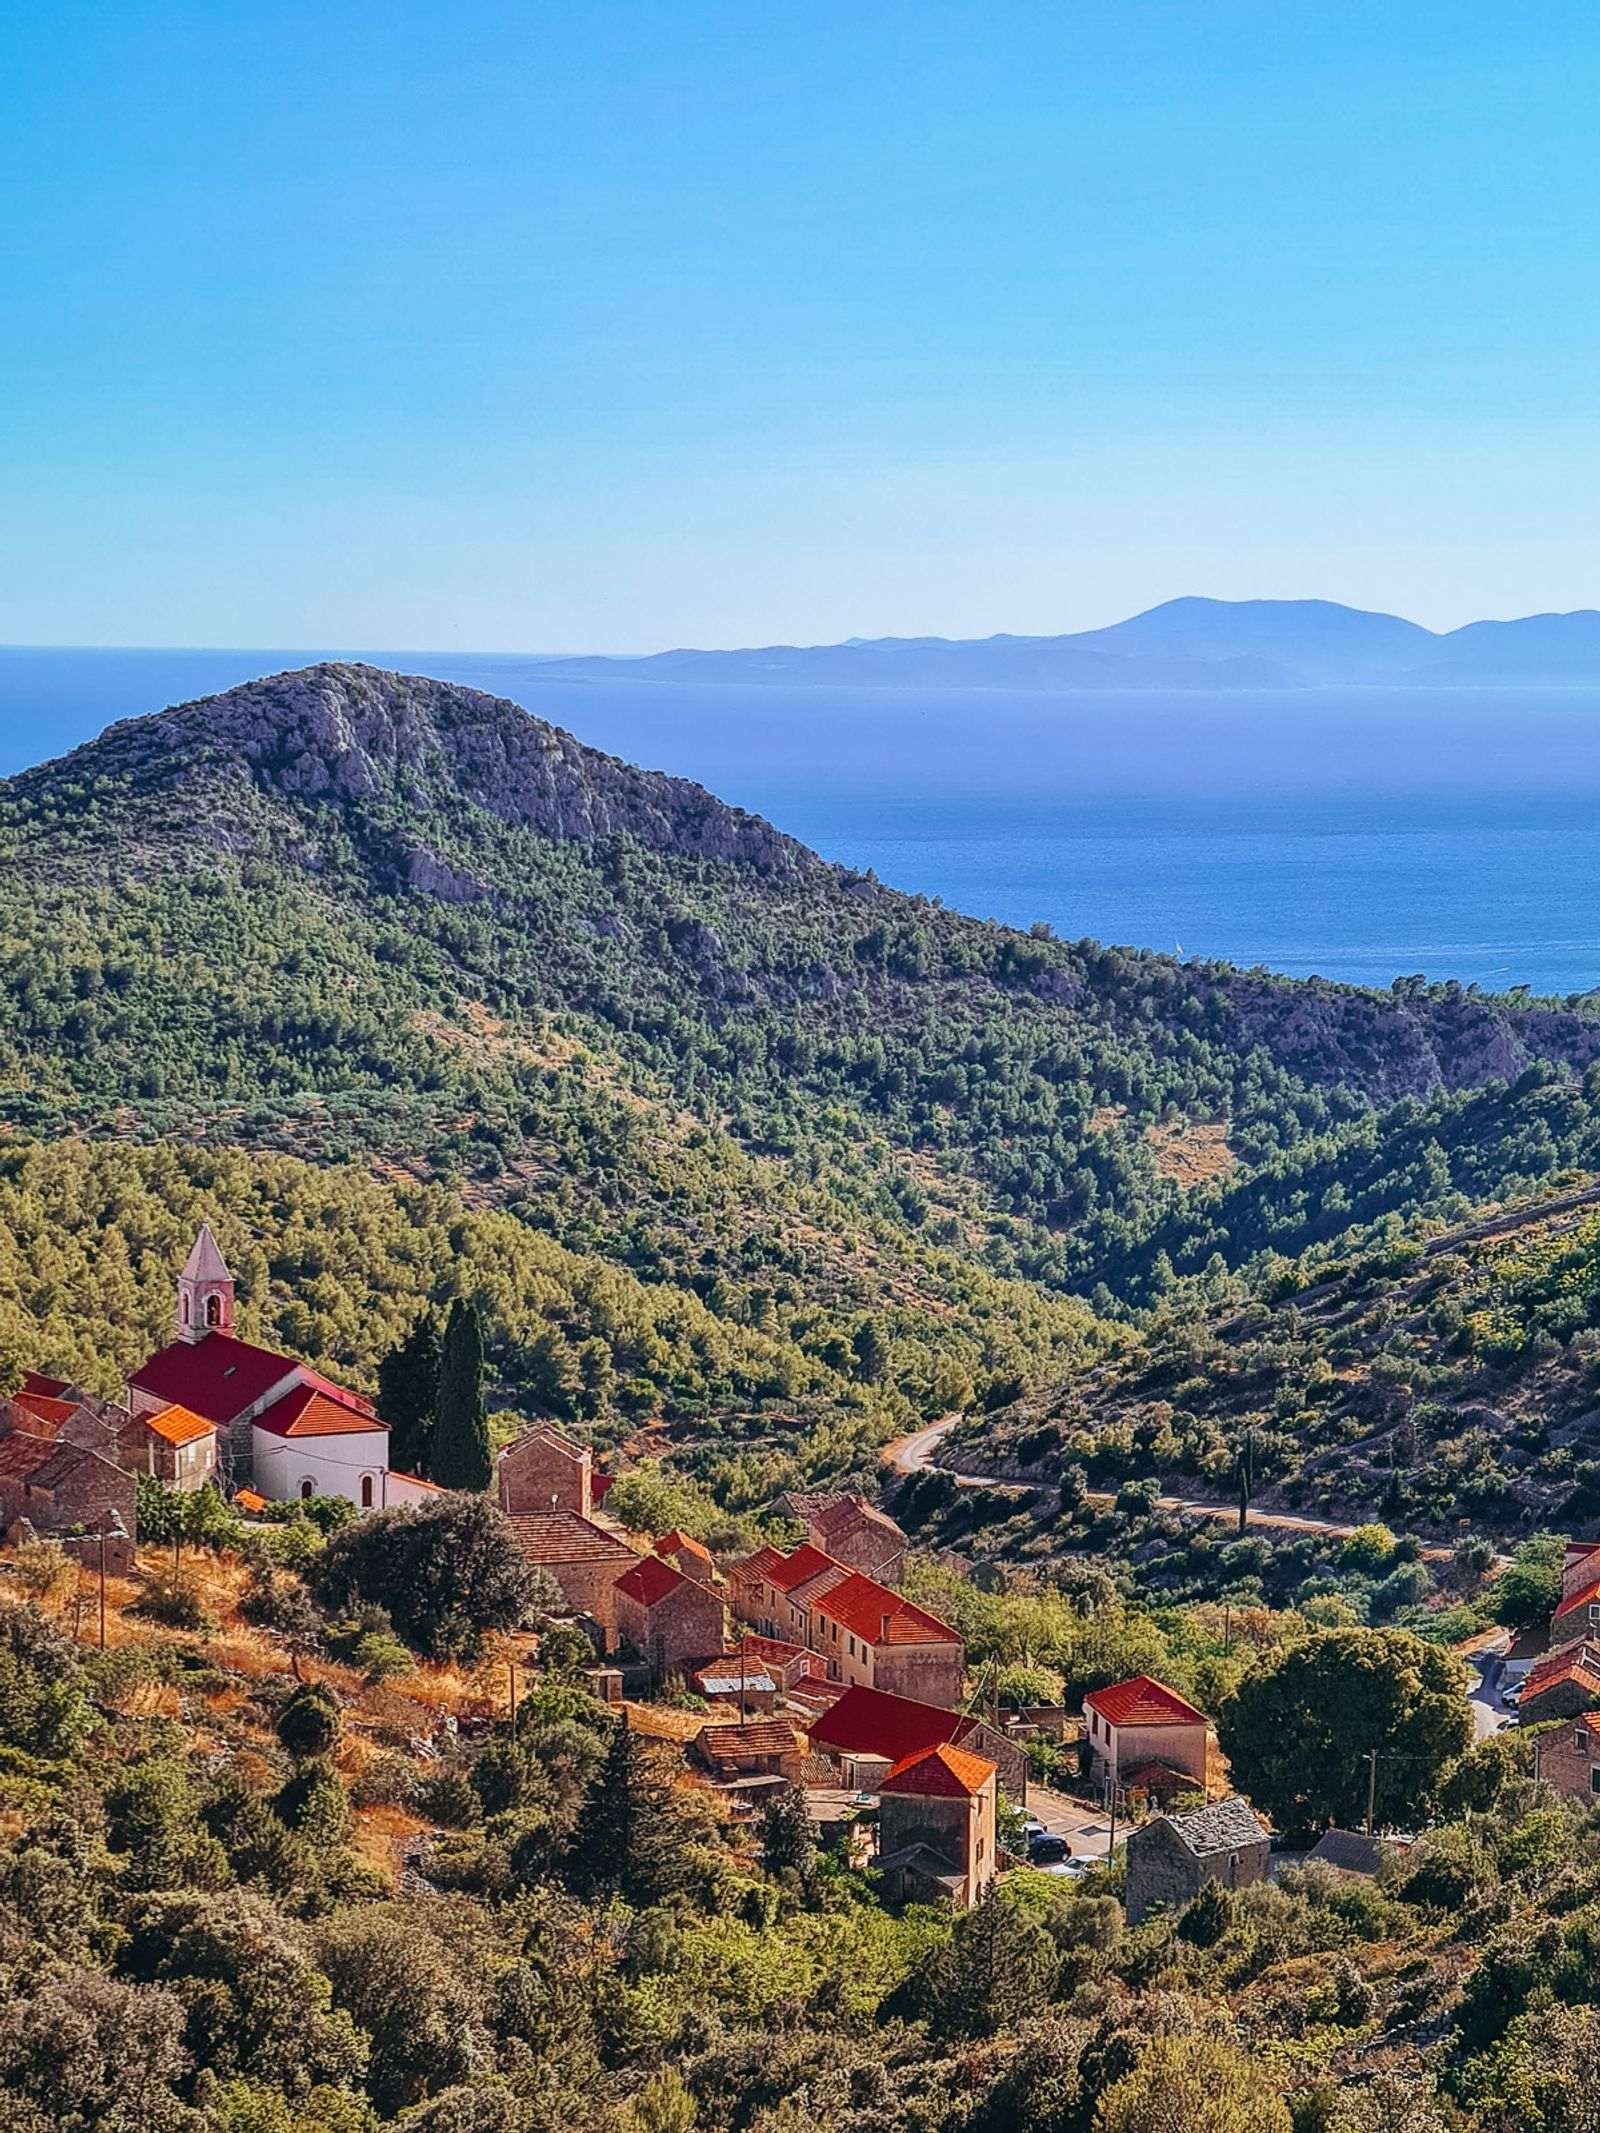 Views of green rolling hills from the top of a mountain in Hvar island. Blue sea in the distance and orange roofed houses in the valley below